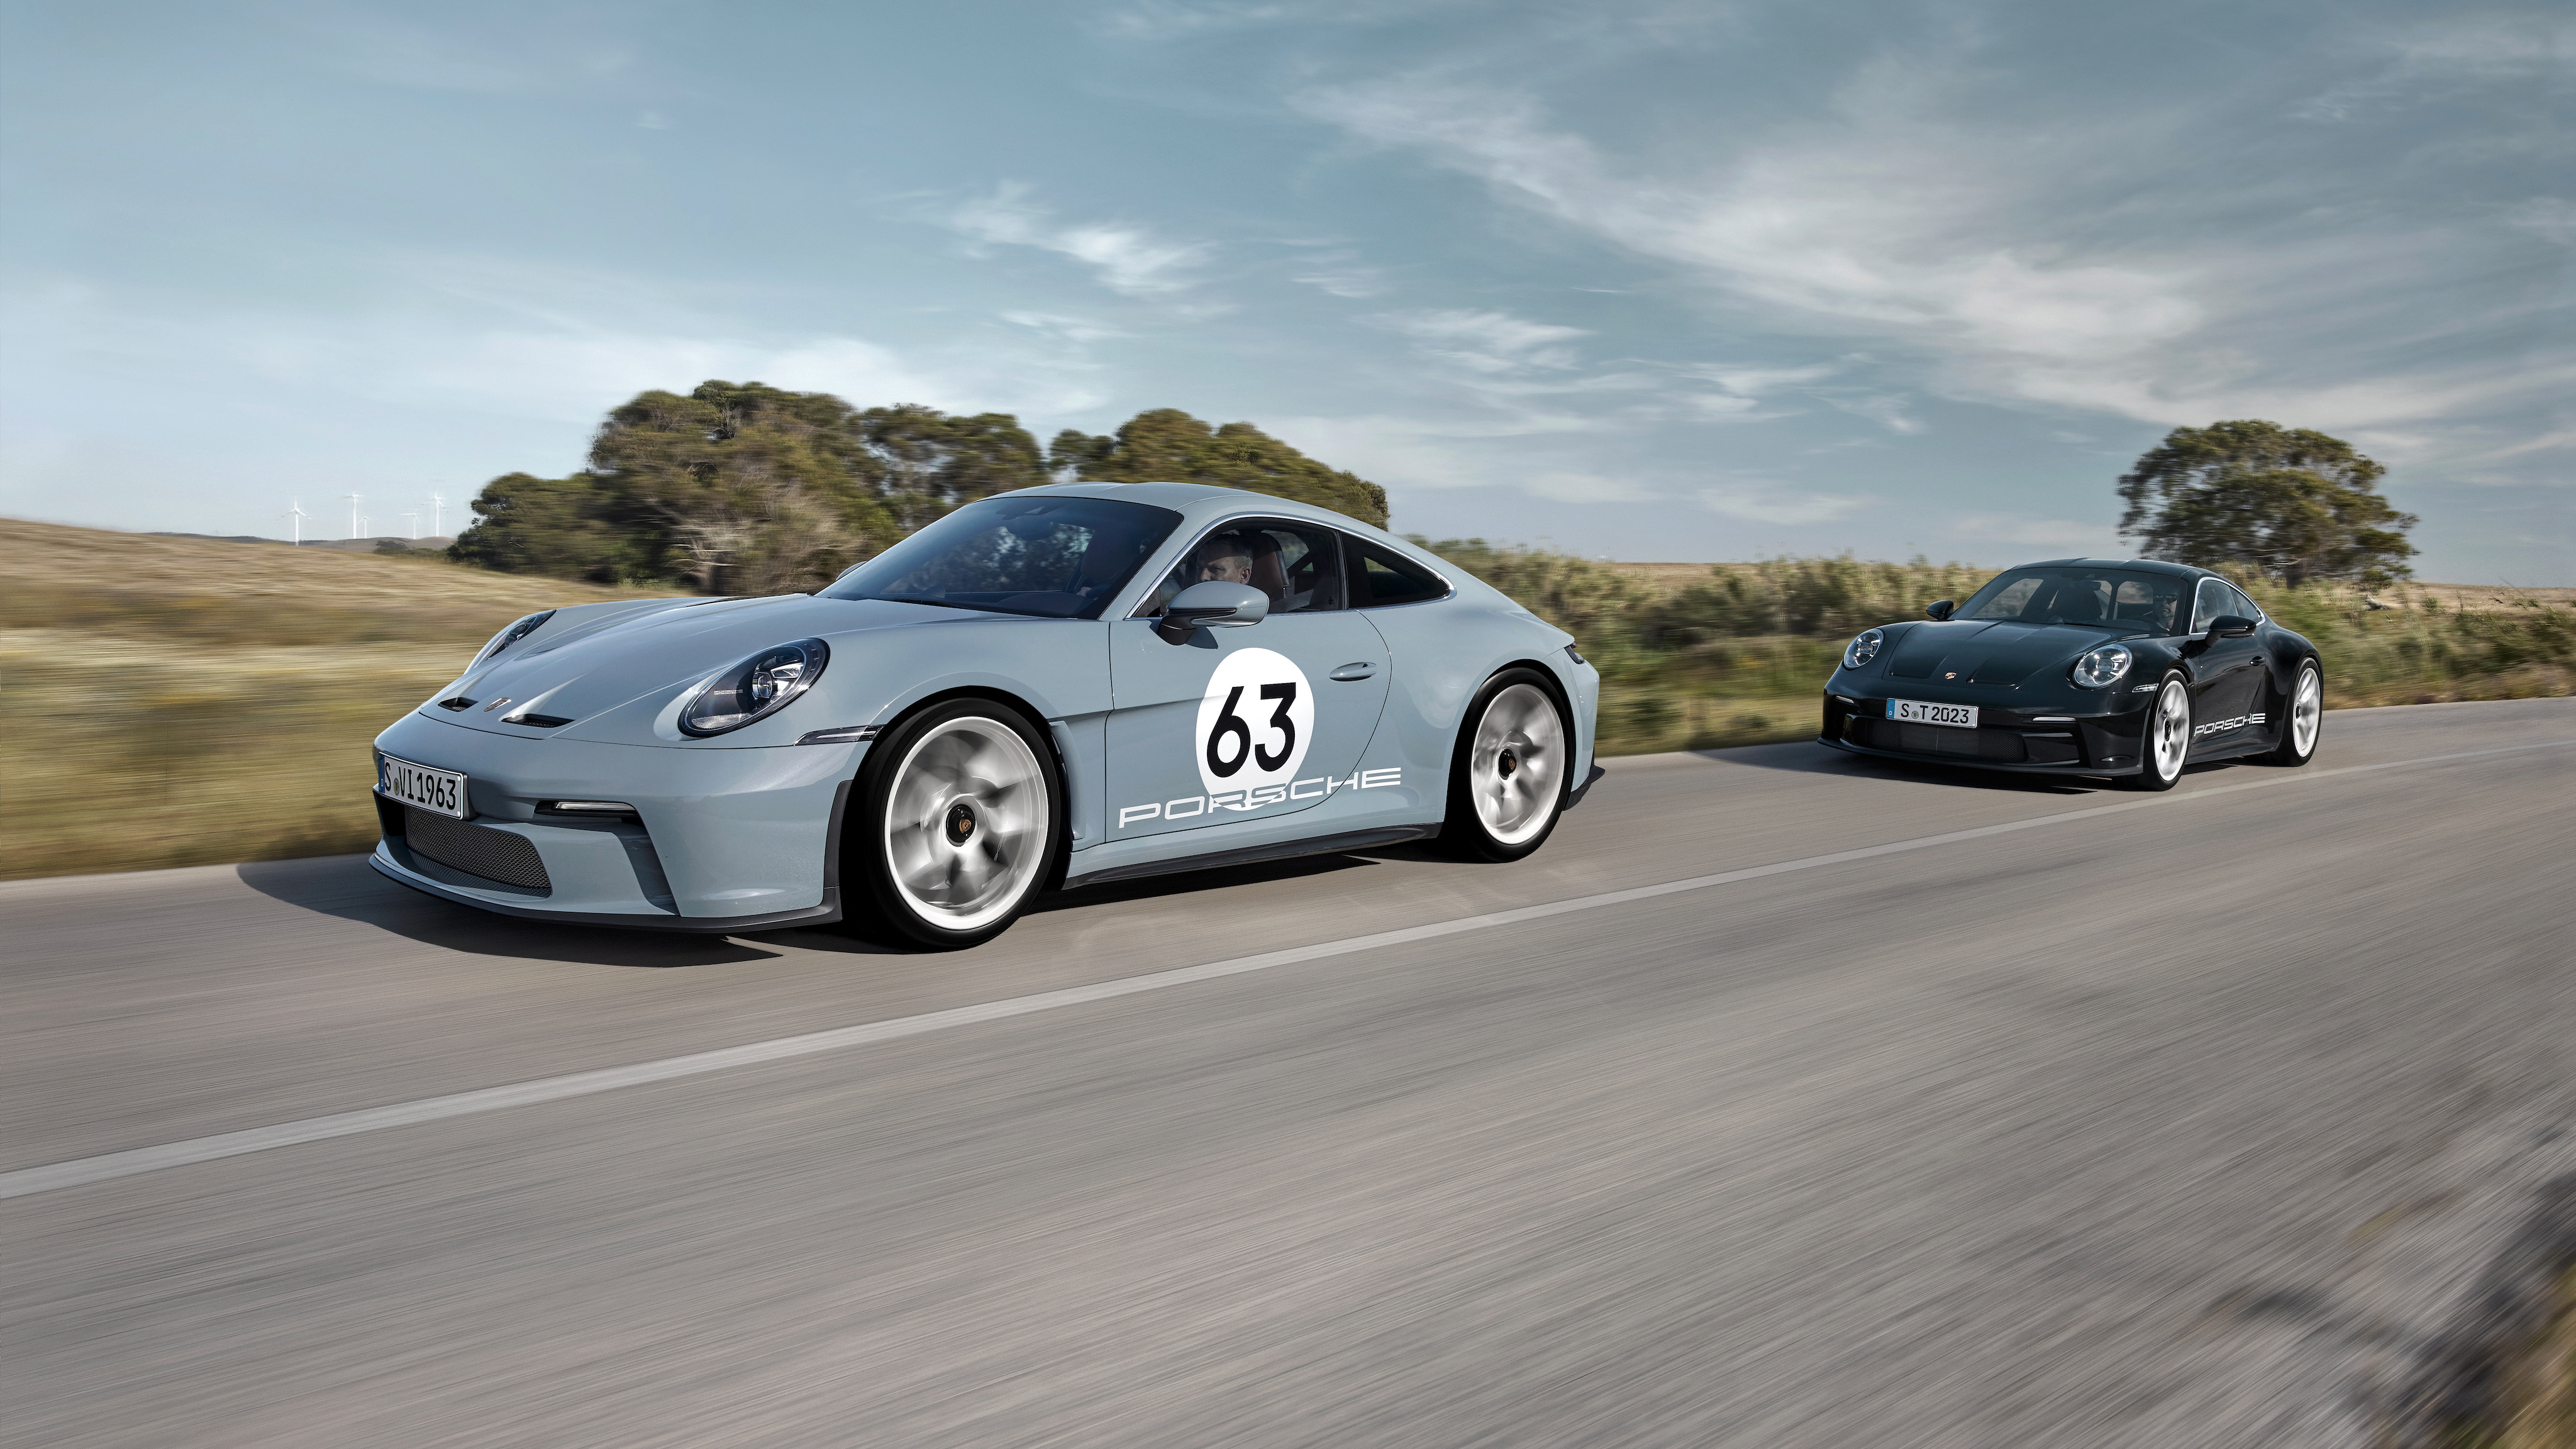 Two Porsche 911 S/T cars driving on the road